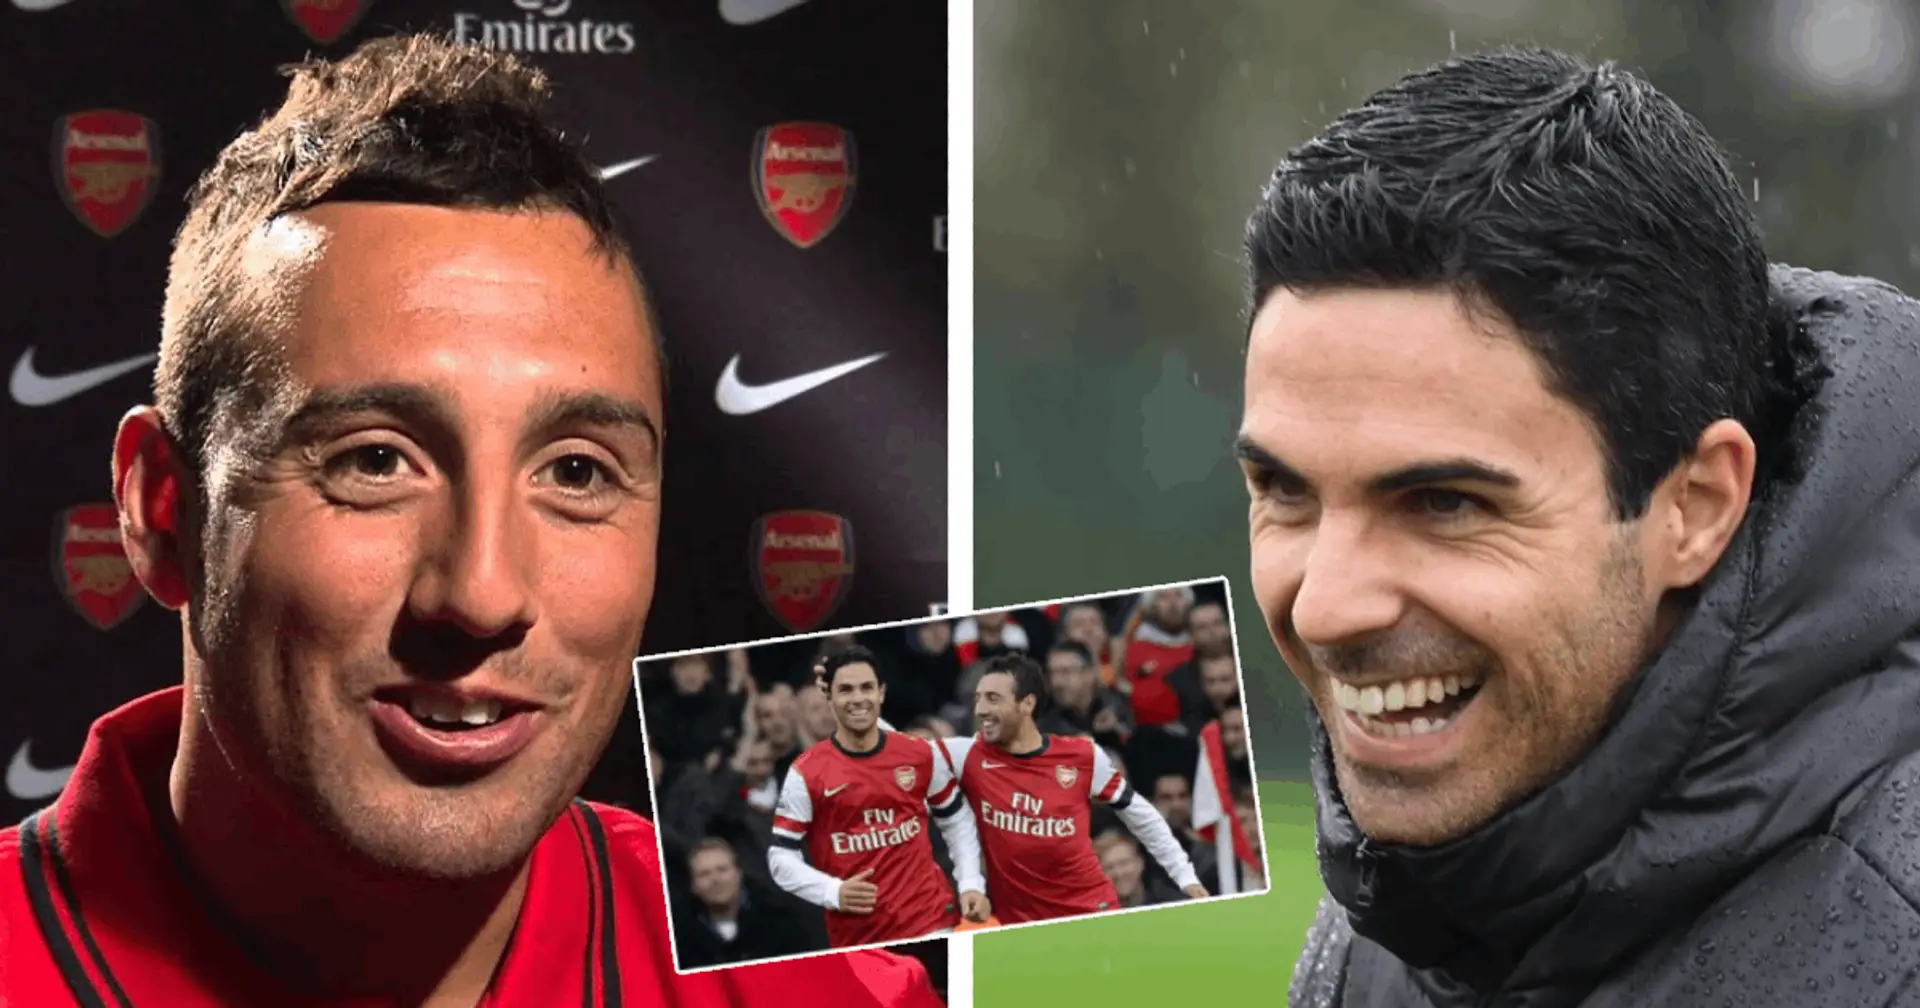 'Arteta is the right man to take the club forward': Santi Cazorla explains why he believes in Mikel